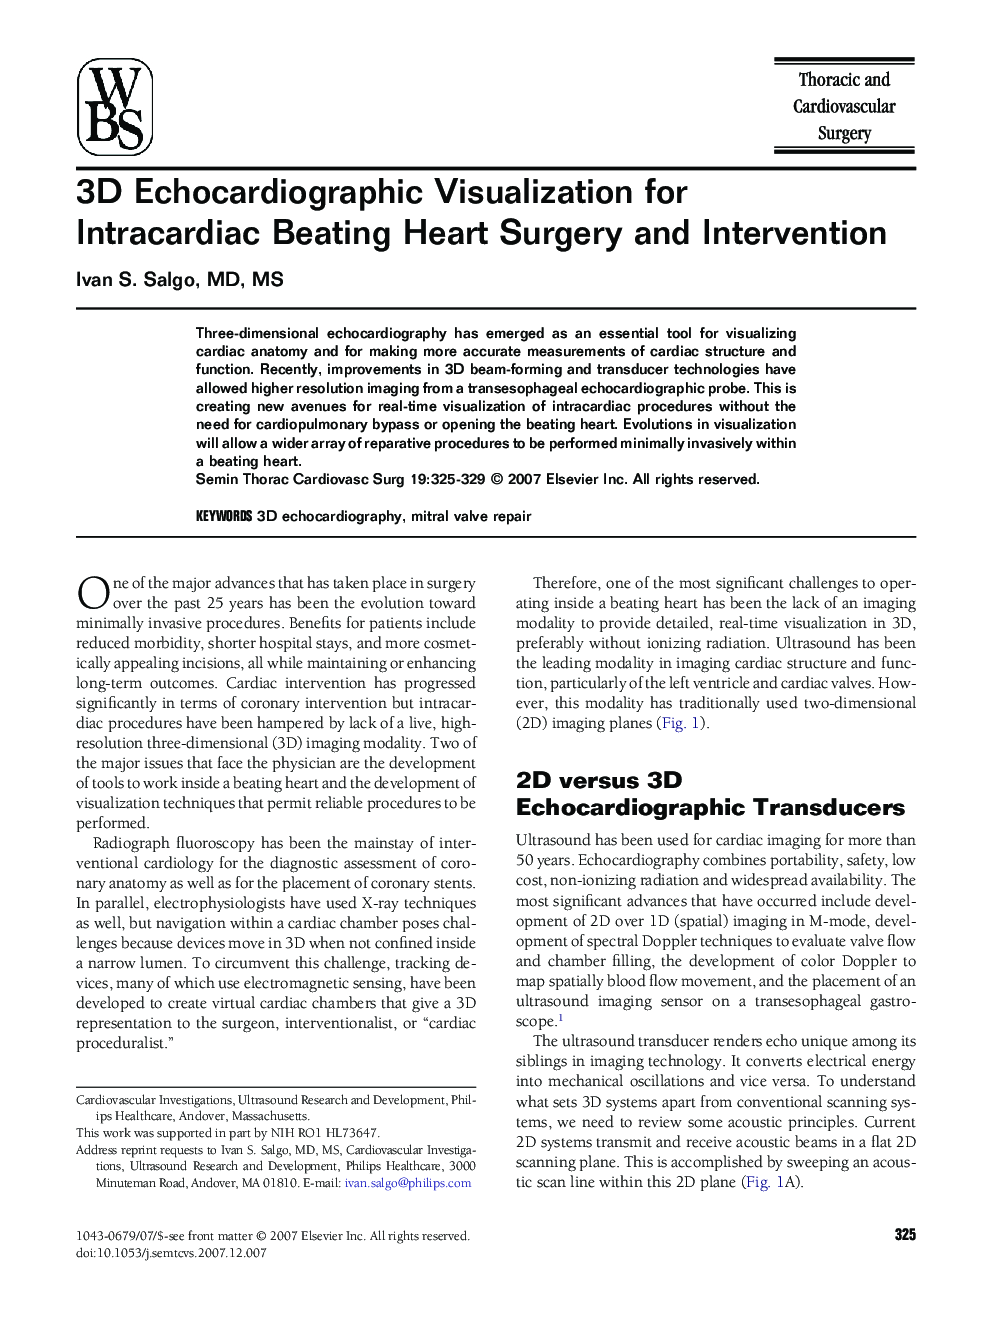 3D Echocardiographic Visualization for Intracardiac Beating Heart Surgery and Intervention